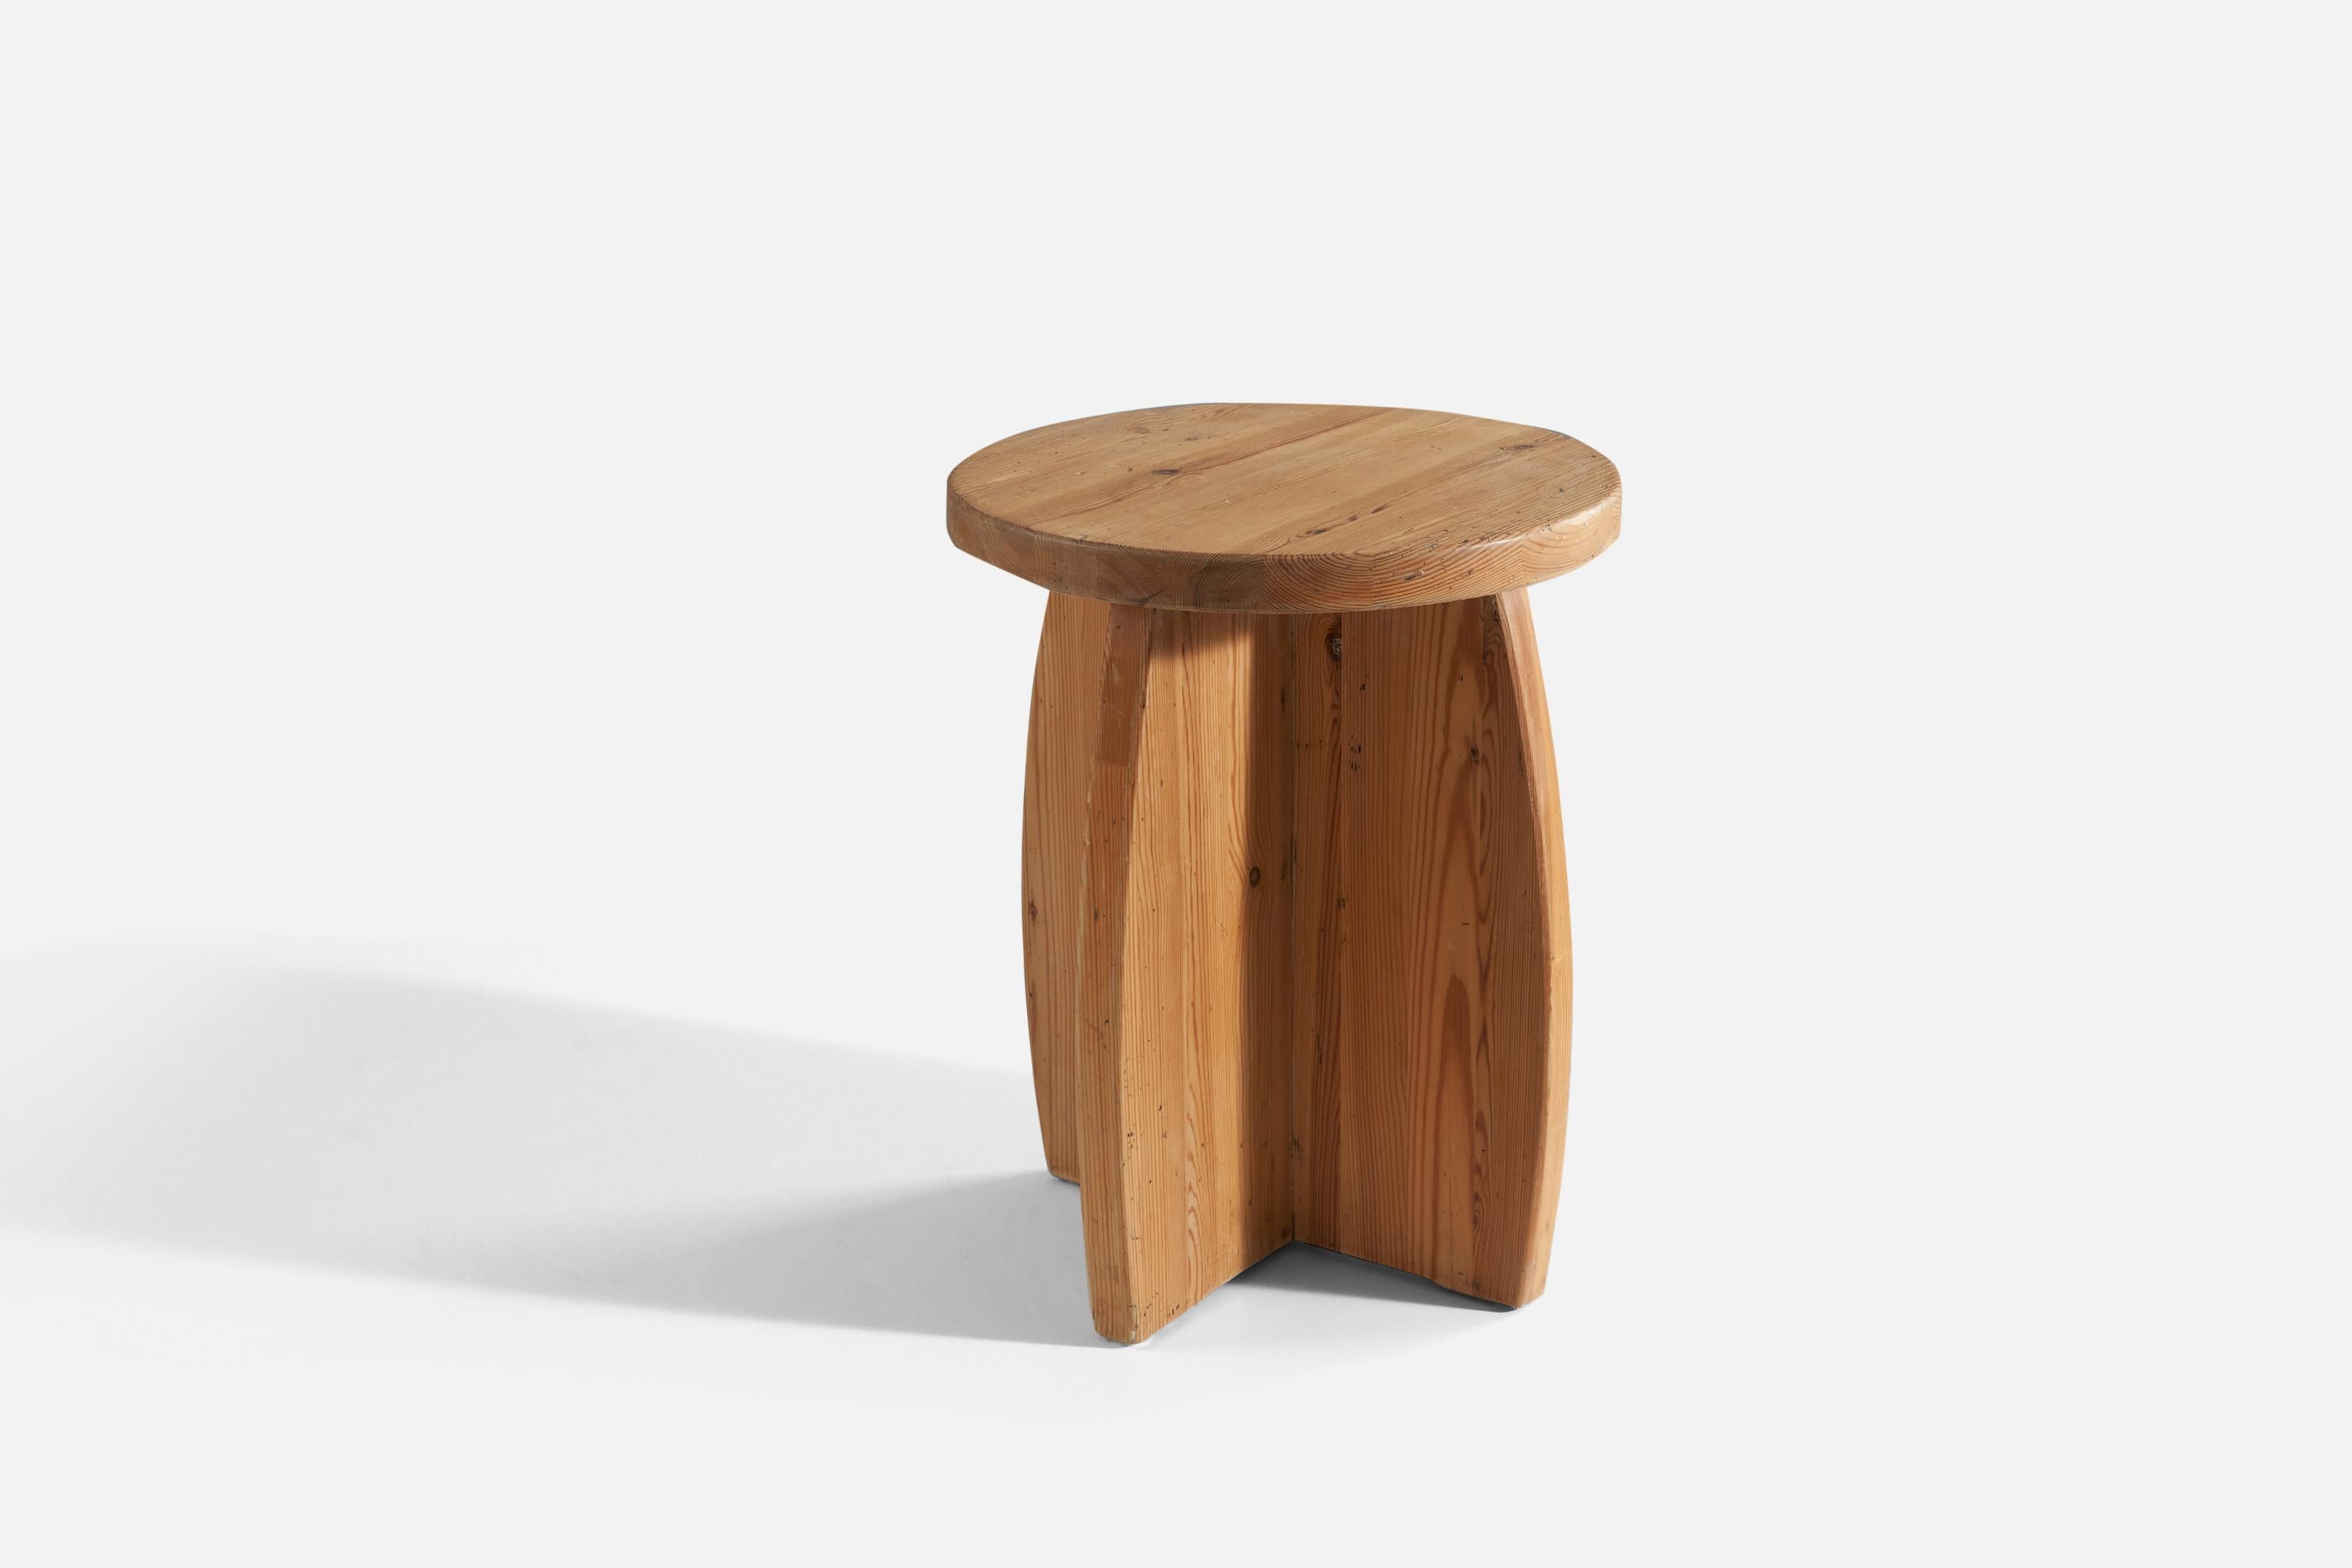 A solid pine wood stool produced in Sweden, c. 1970s.